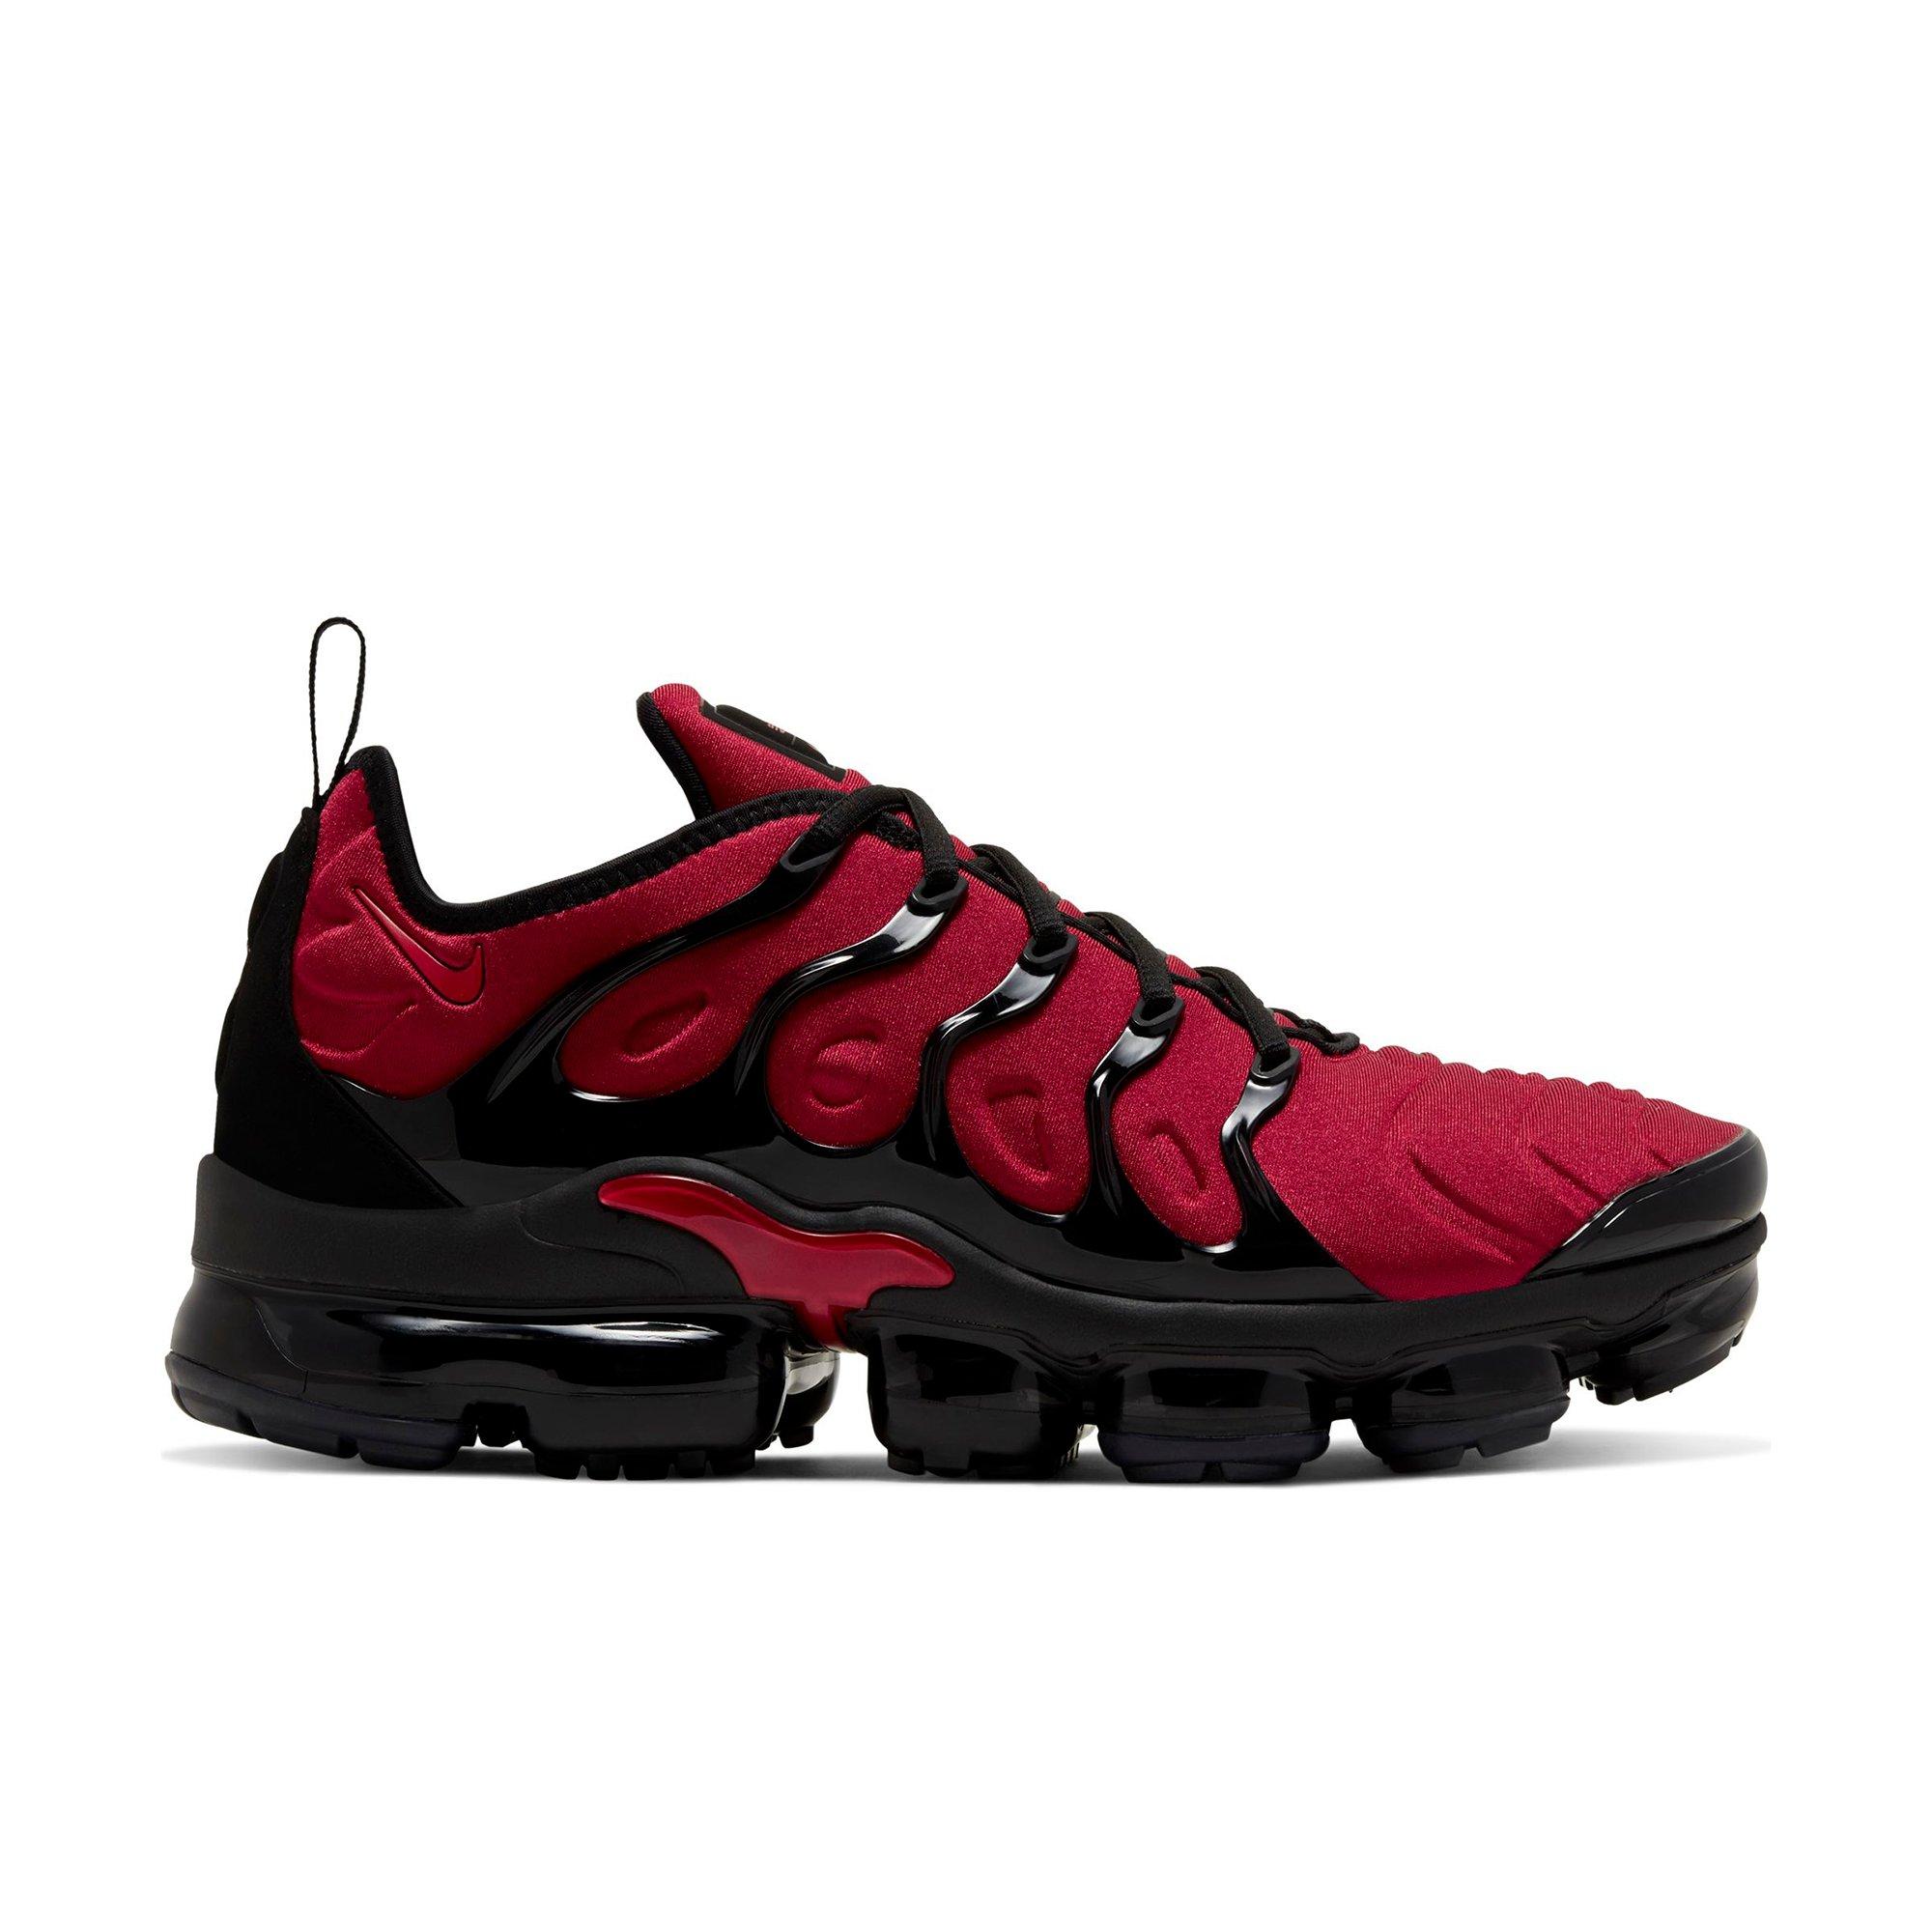 red and black vapor air max